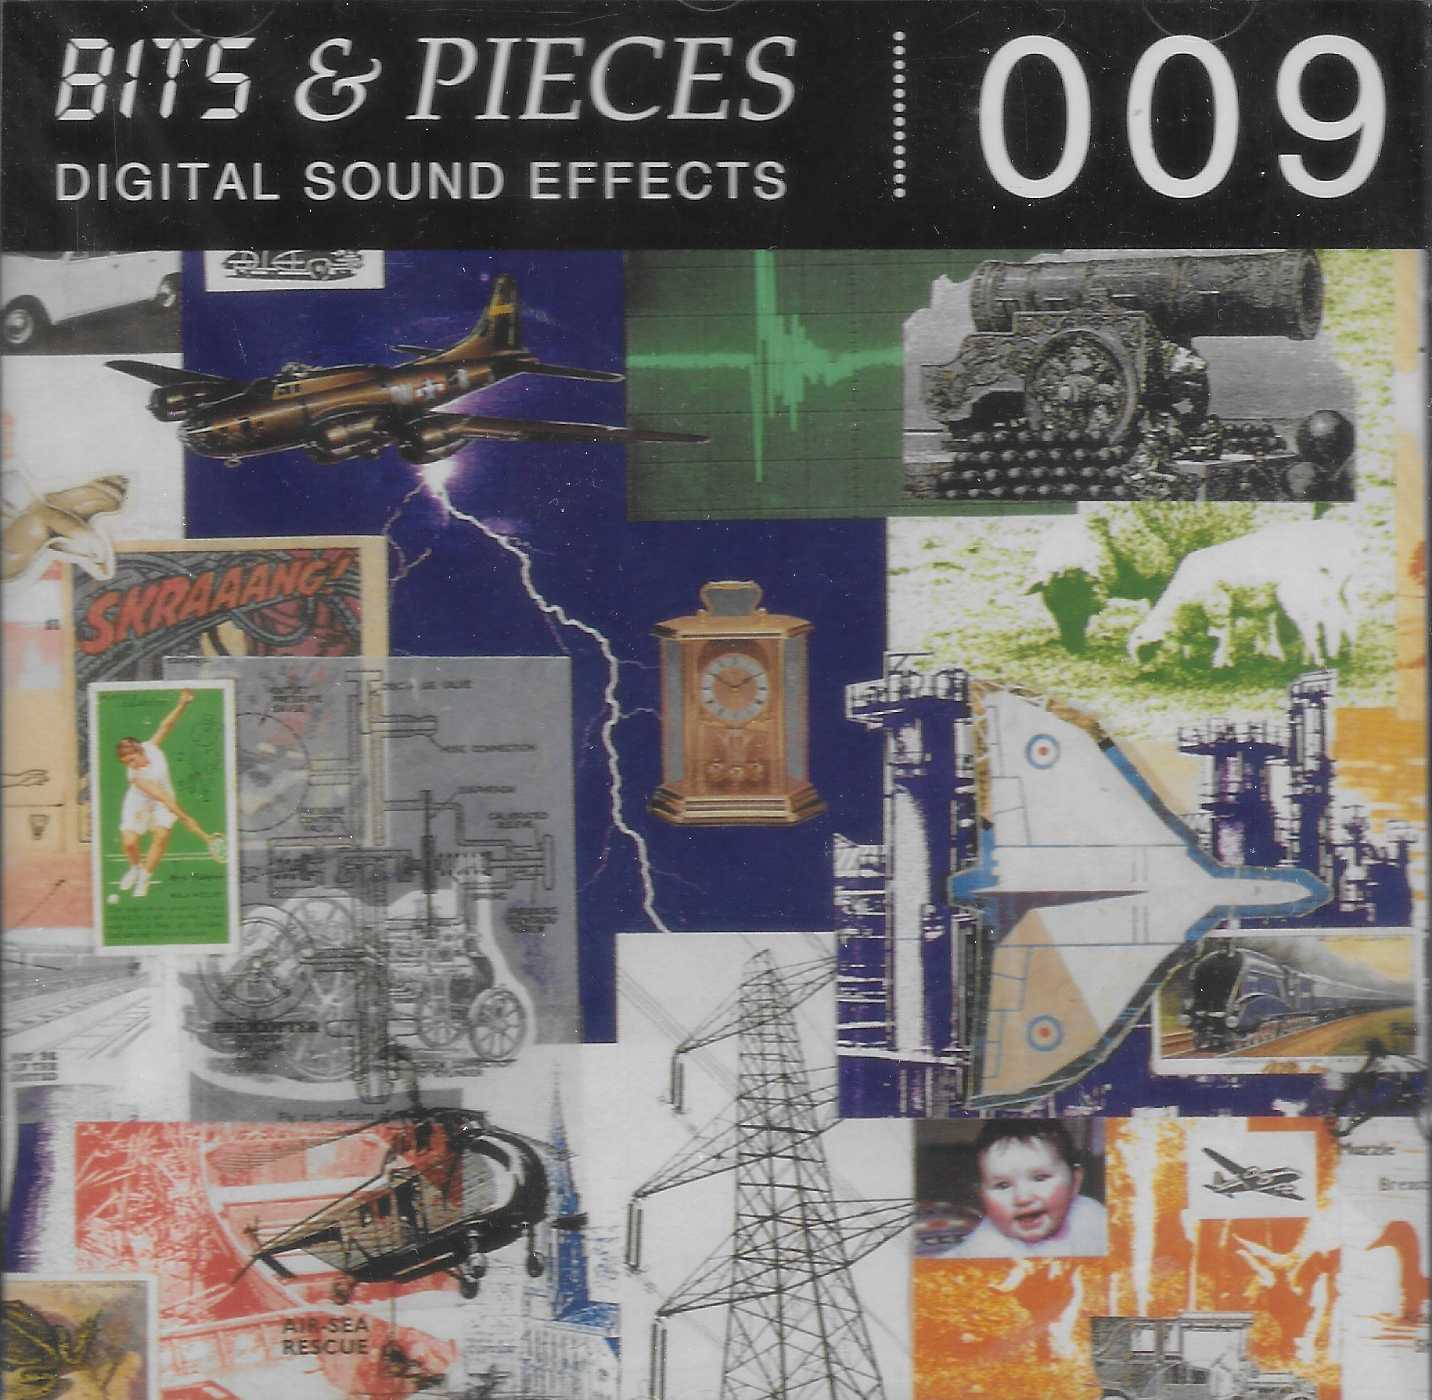 Picture of Bits & pieces digital sound effects 009 by artist Various from ITV, Channel 4 and Channel 5 cds library